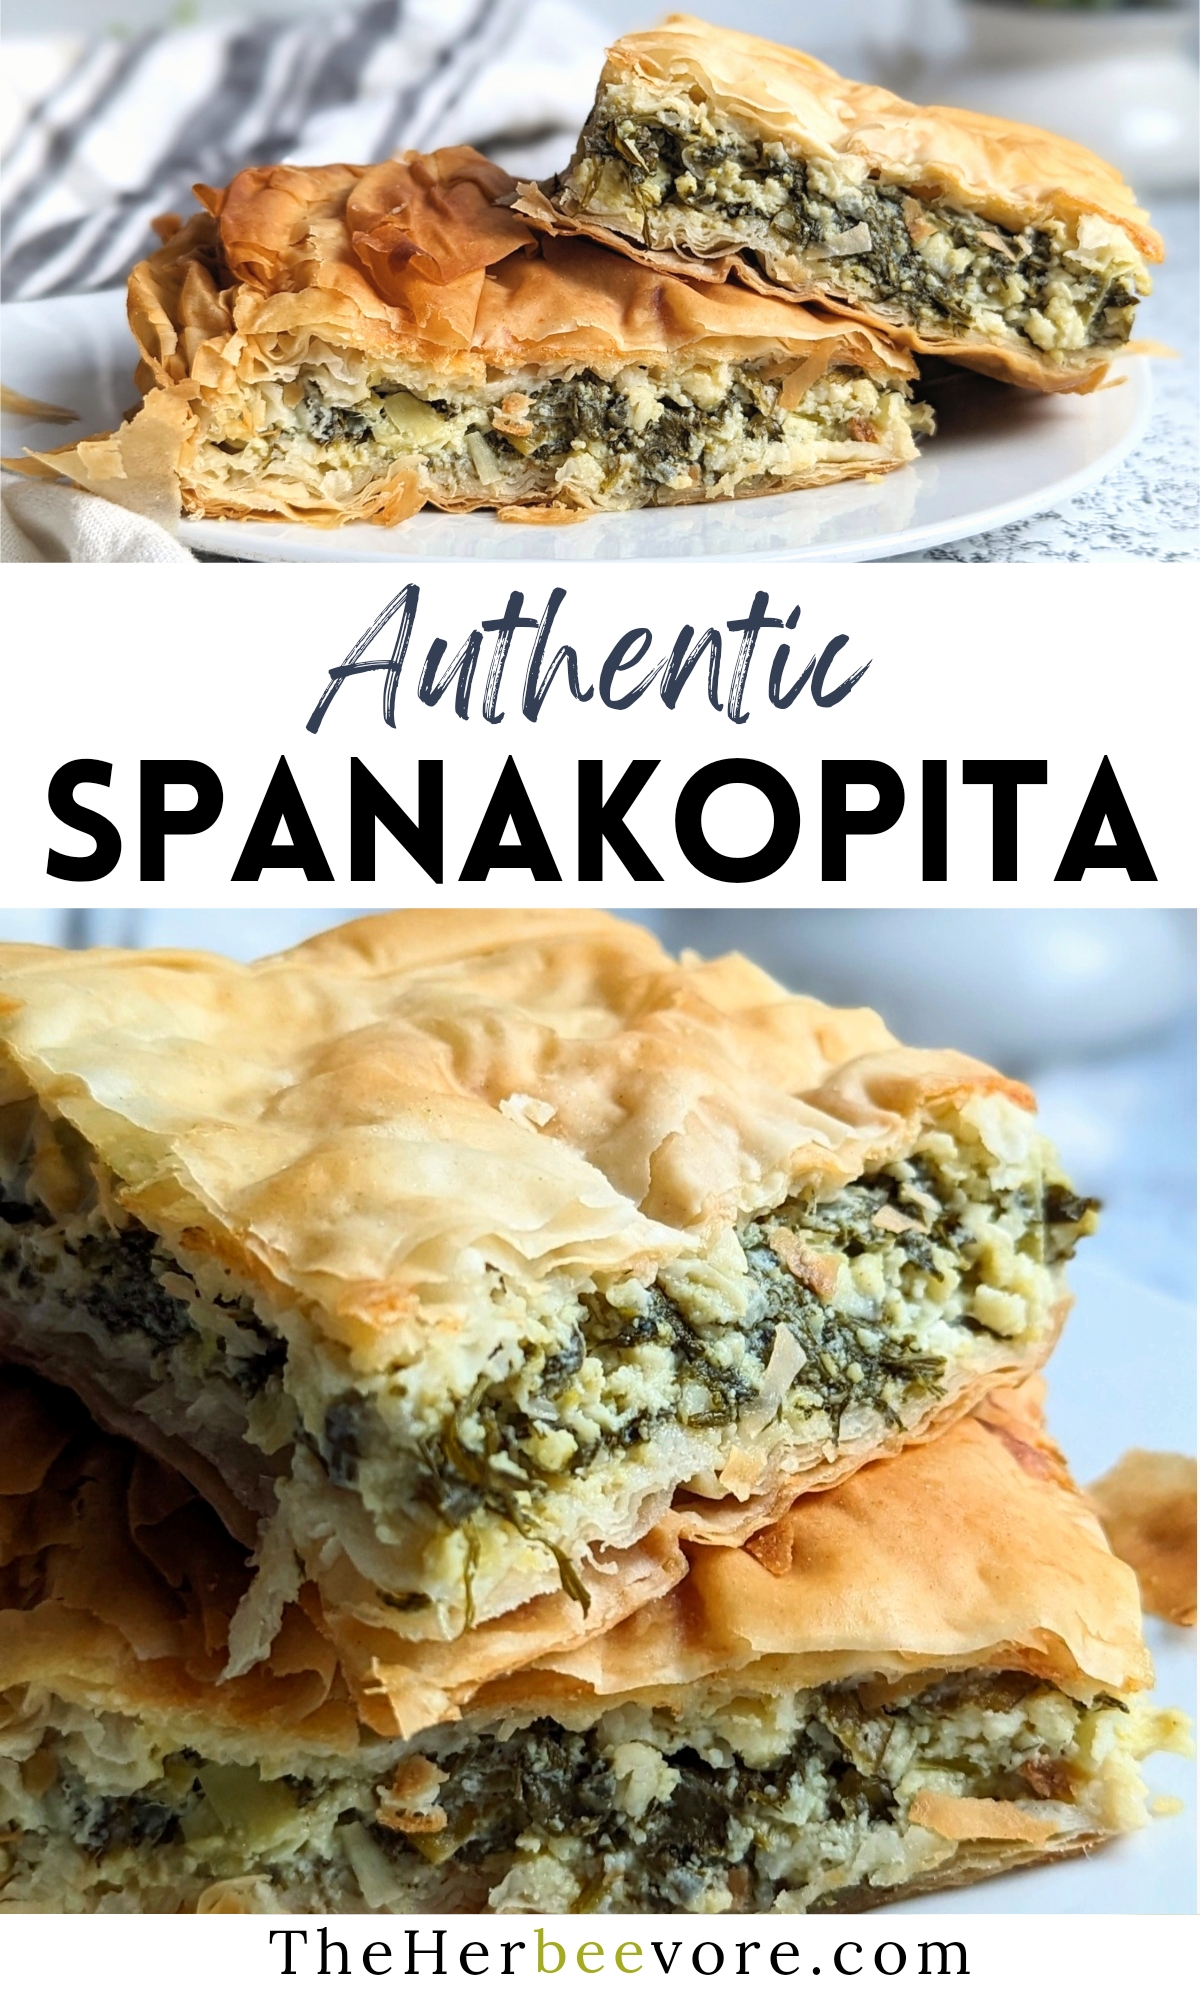 authentic spanakopita recipe with feta cheese and spinach and leek pie